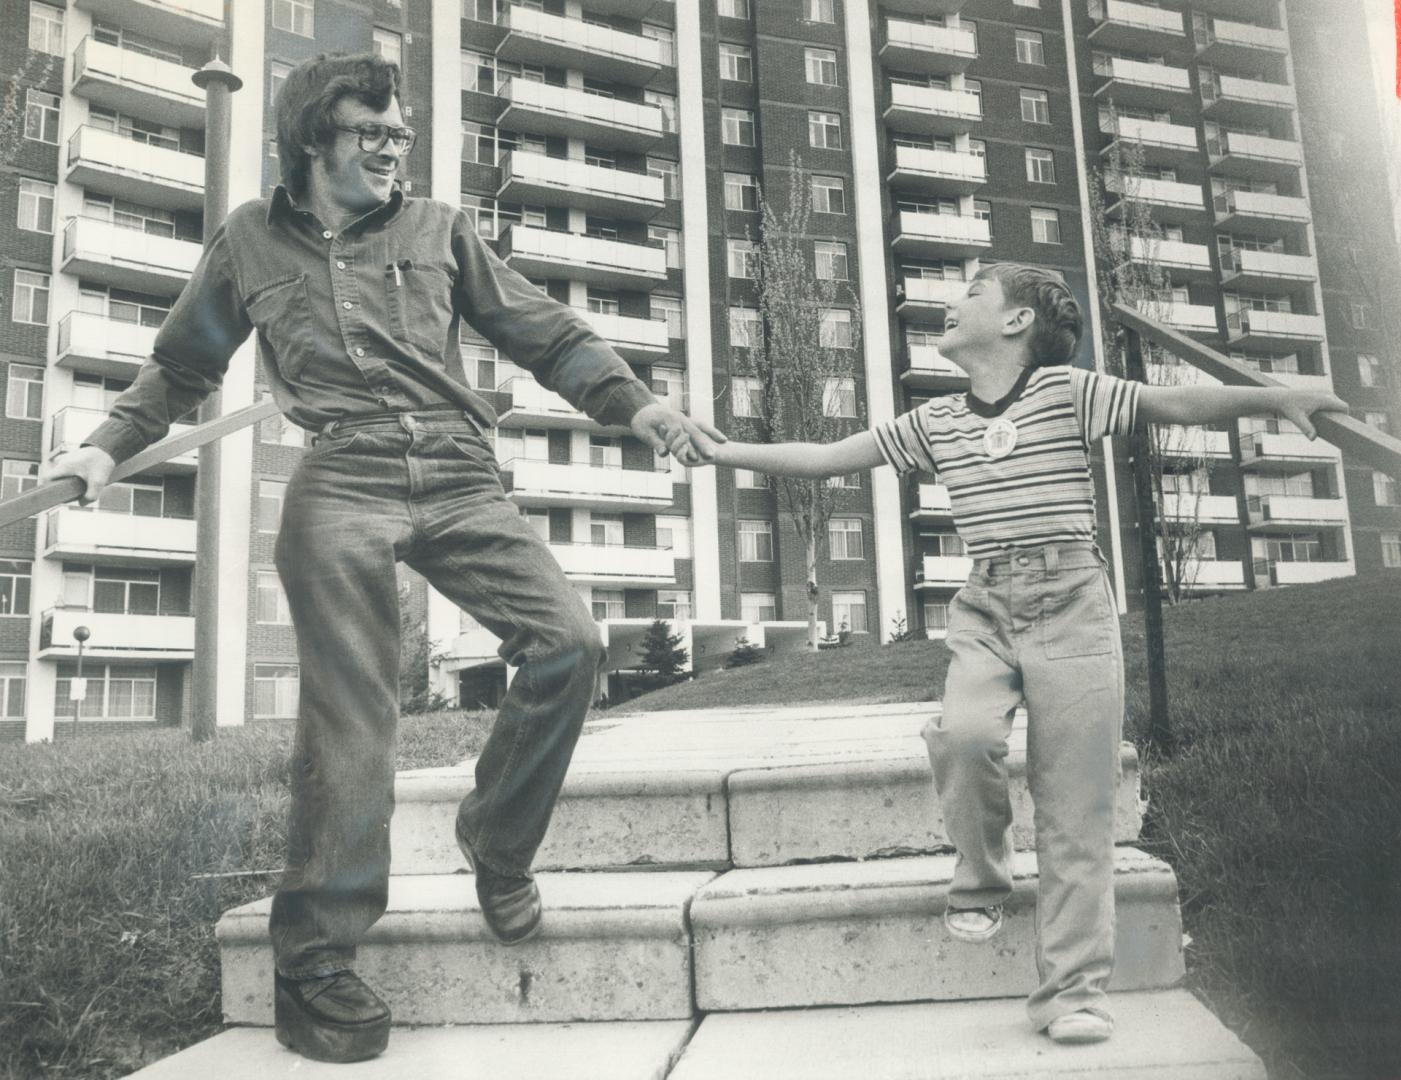 It was home: Calvin Struthers and his 6-year-old son Shawn in front of the building he was hired to take care of, despite a disability caused by polio when he was a baby